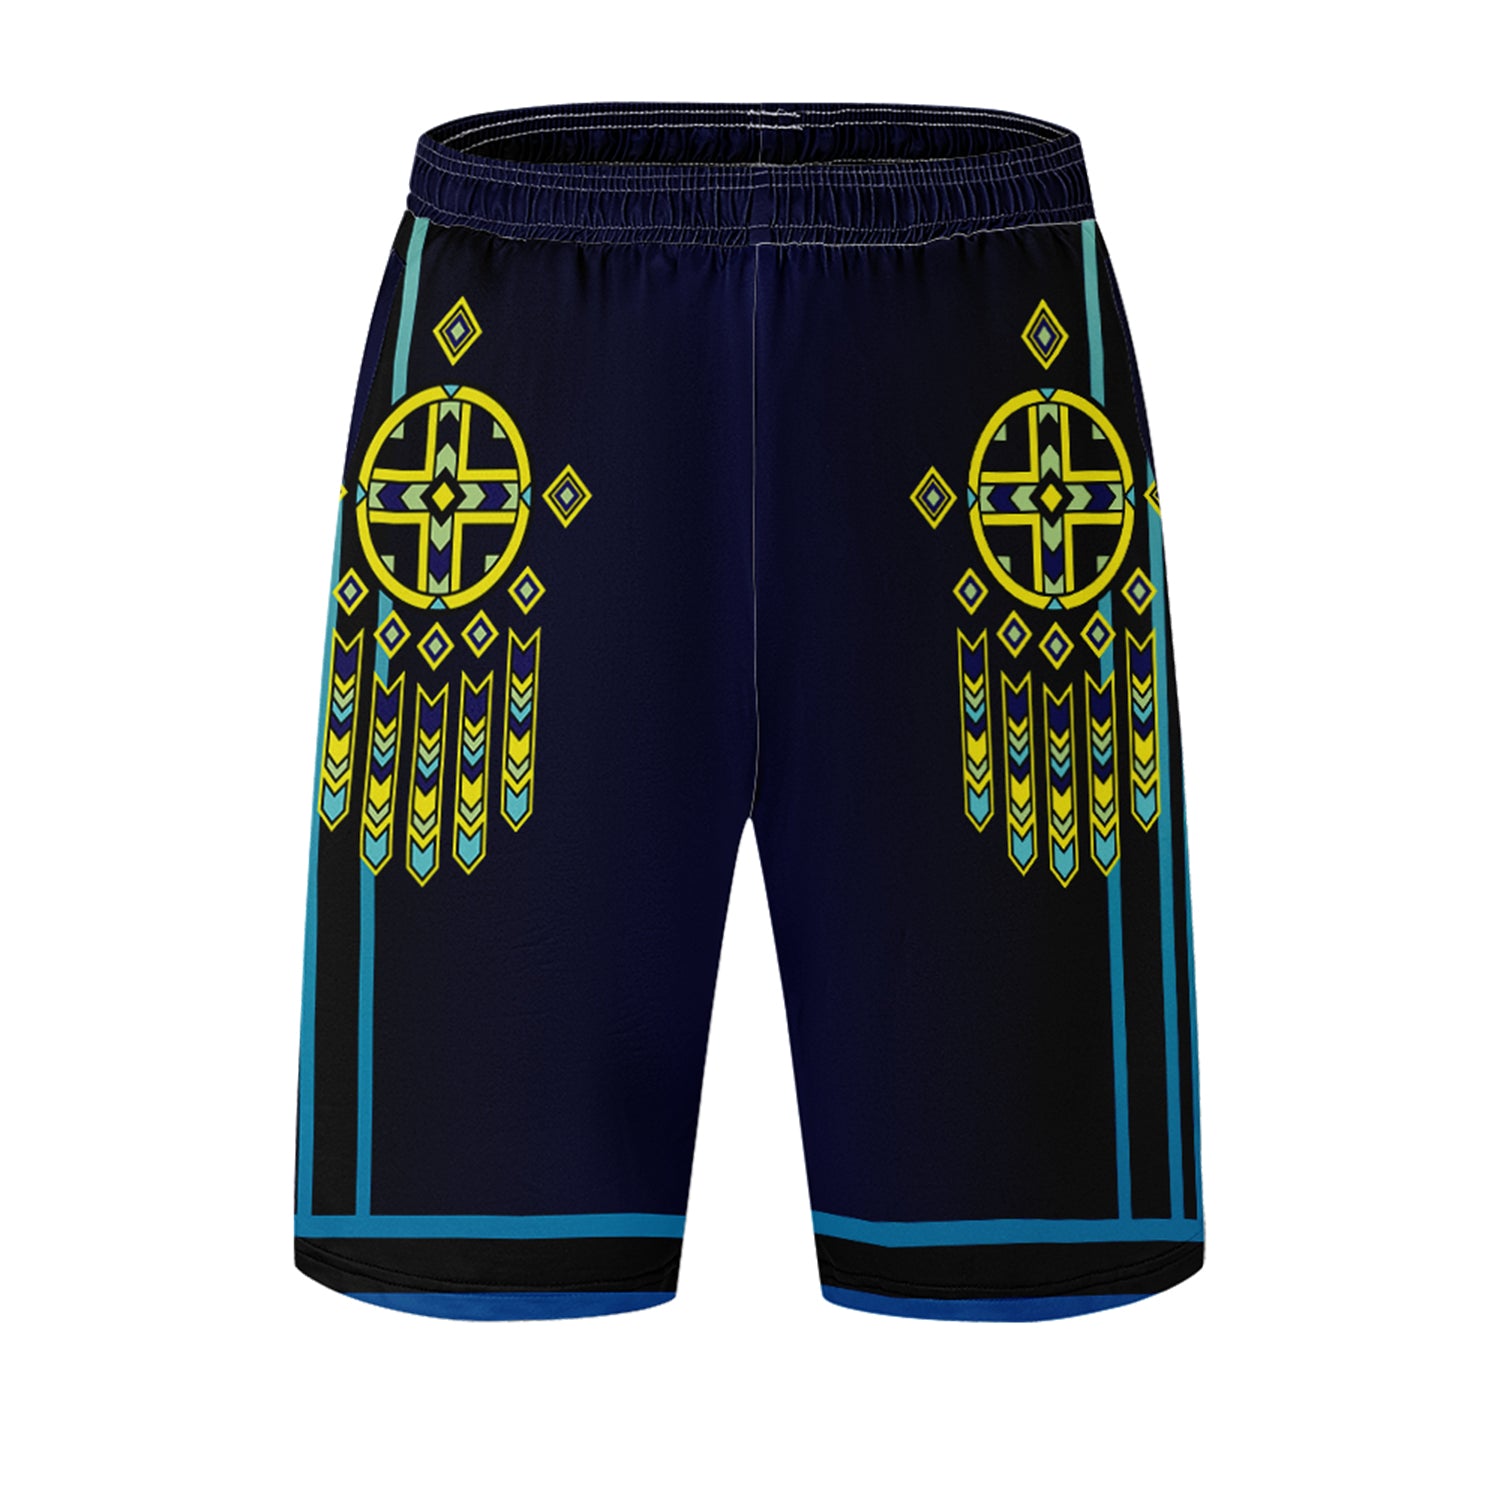 Dreamcather Athletic Shorts with Pockets